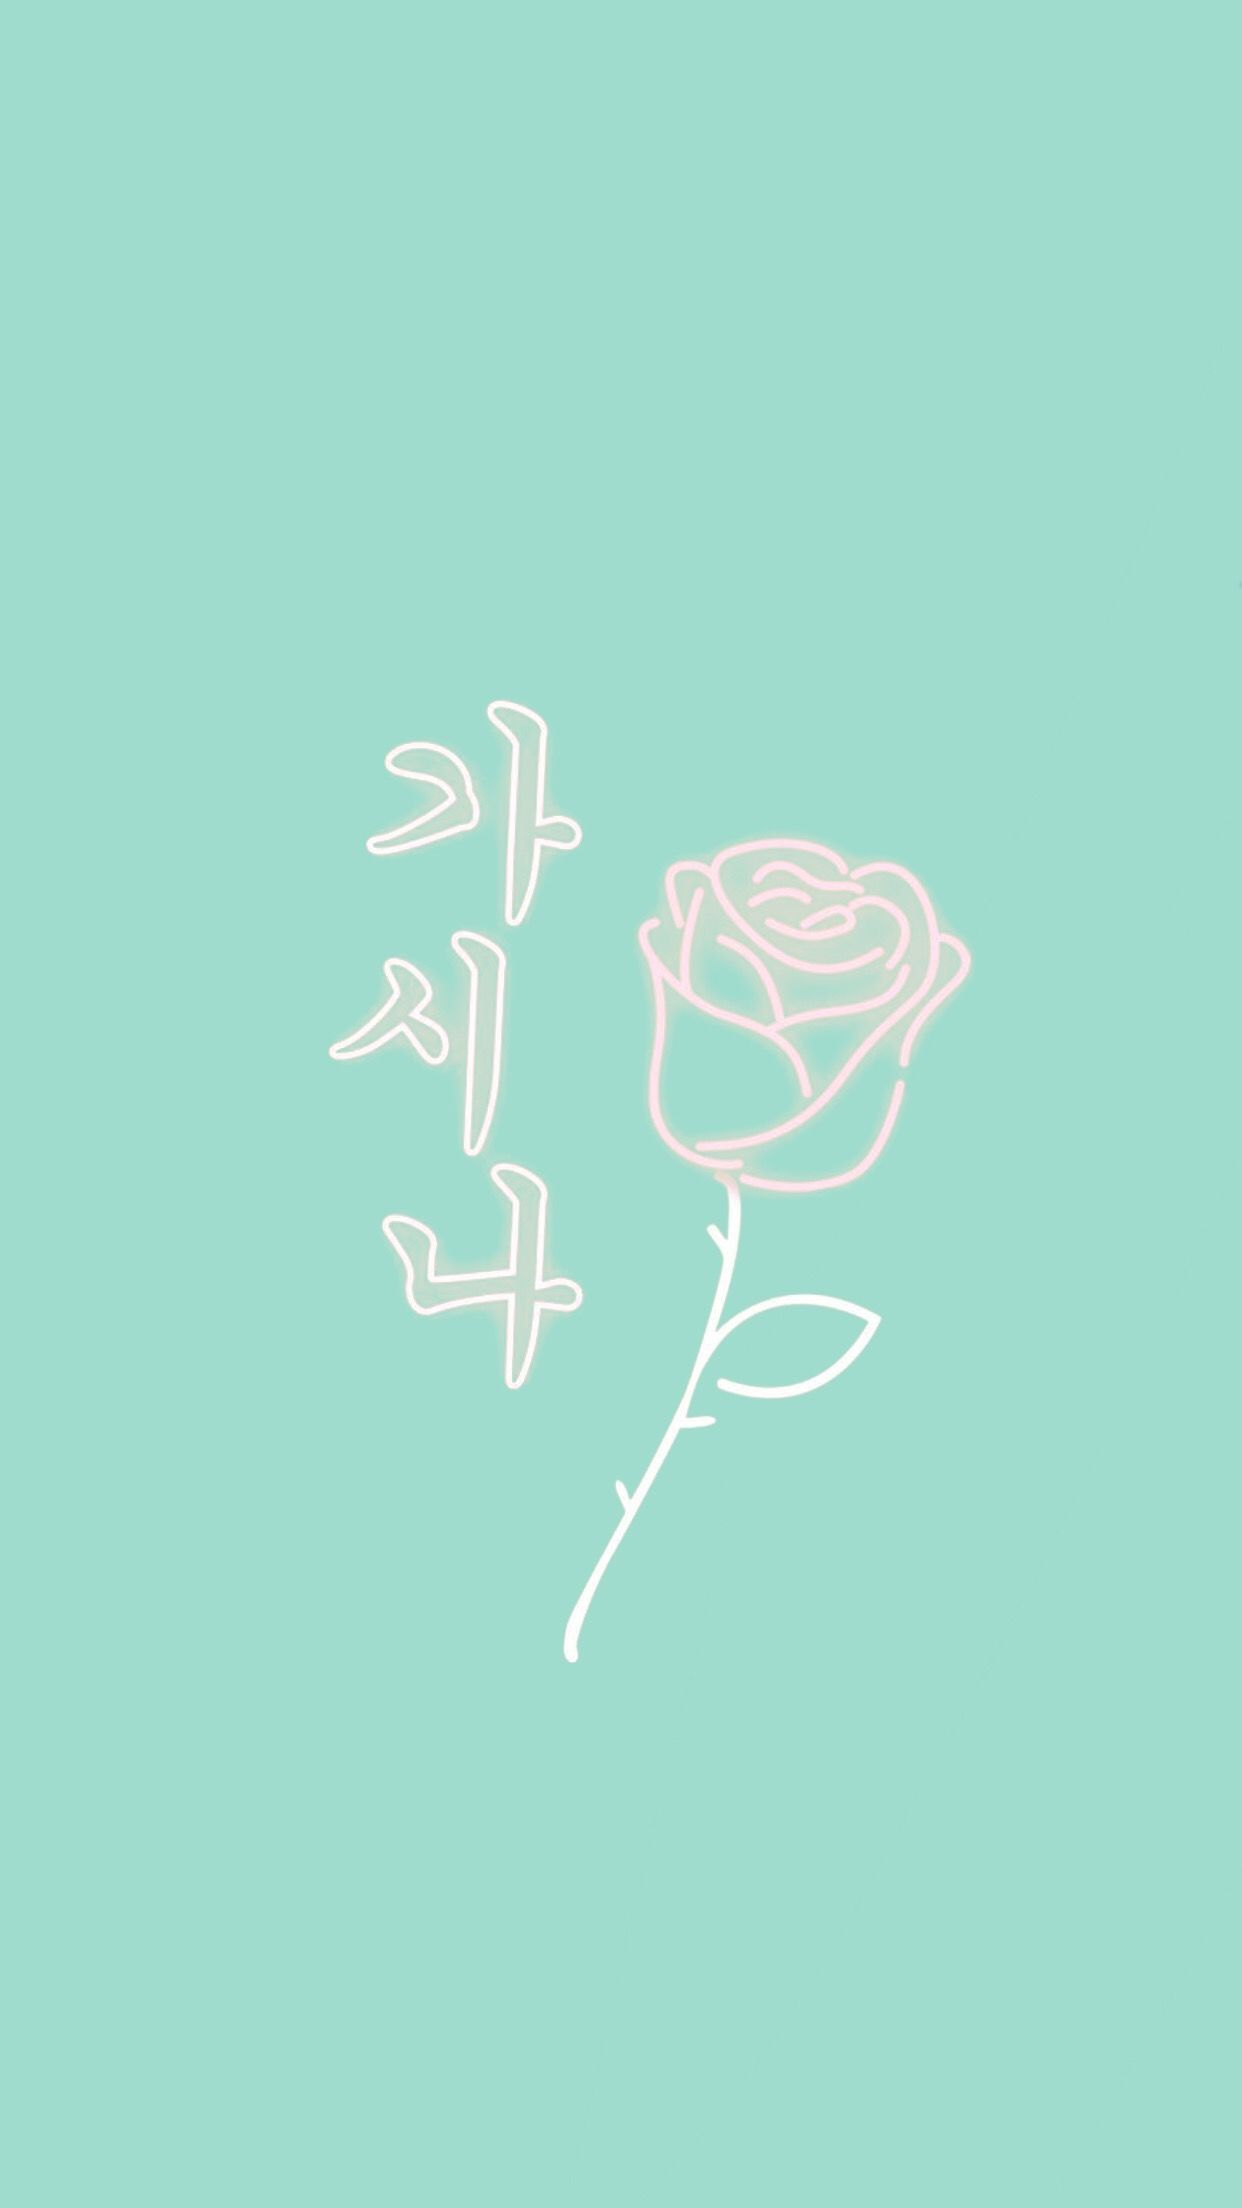 A pink rose with the word korean on it - Pastel green, mint green